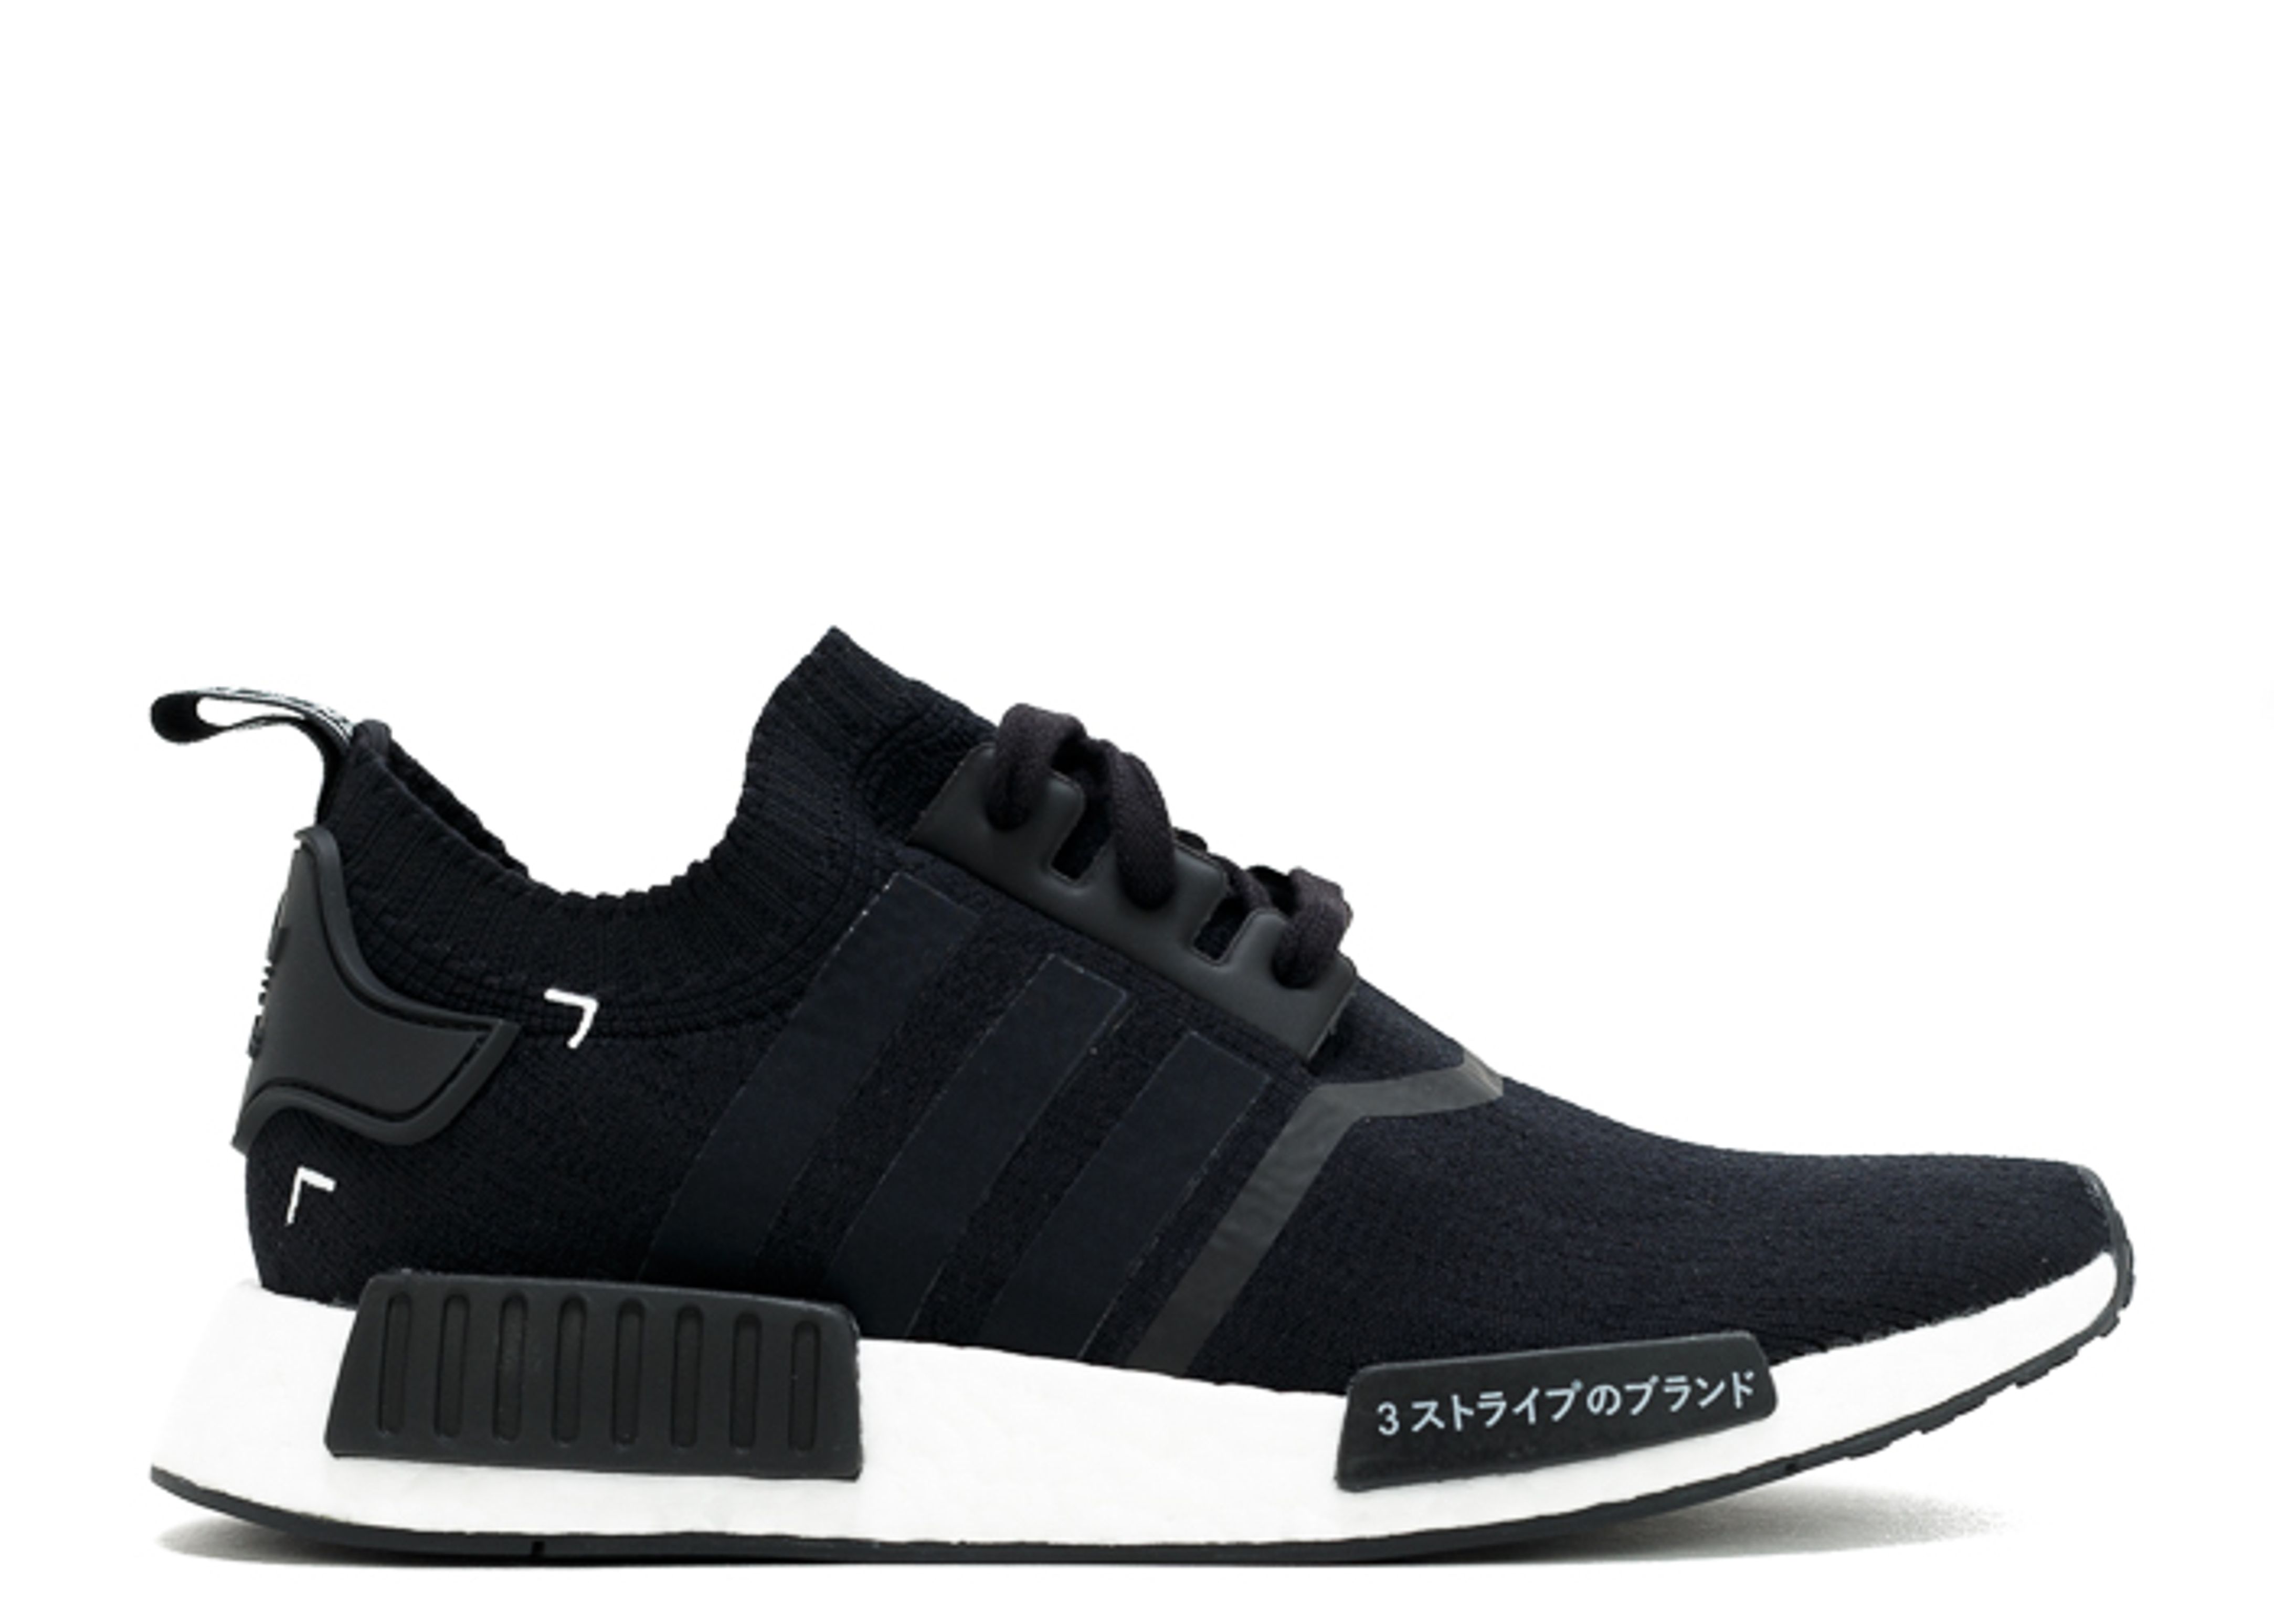 Adidas NMD XR1 Shoes Last Sale StockX Go Explore You.